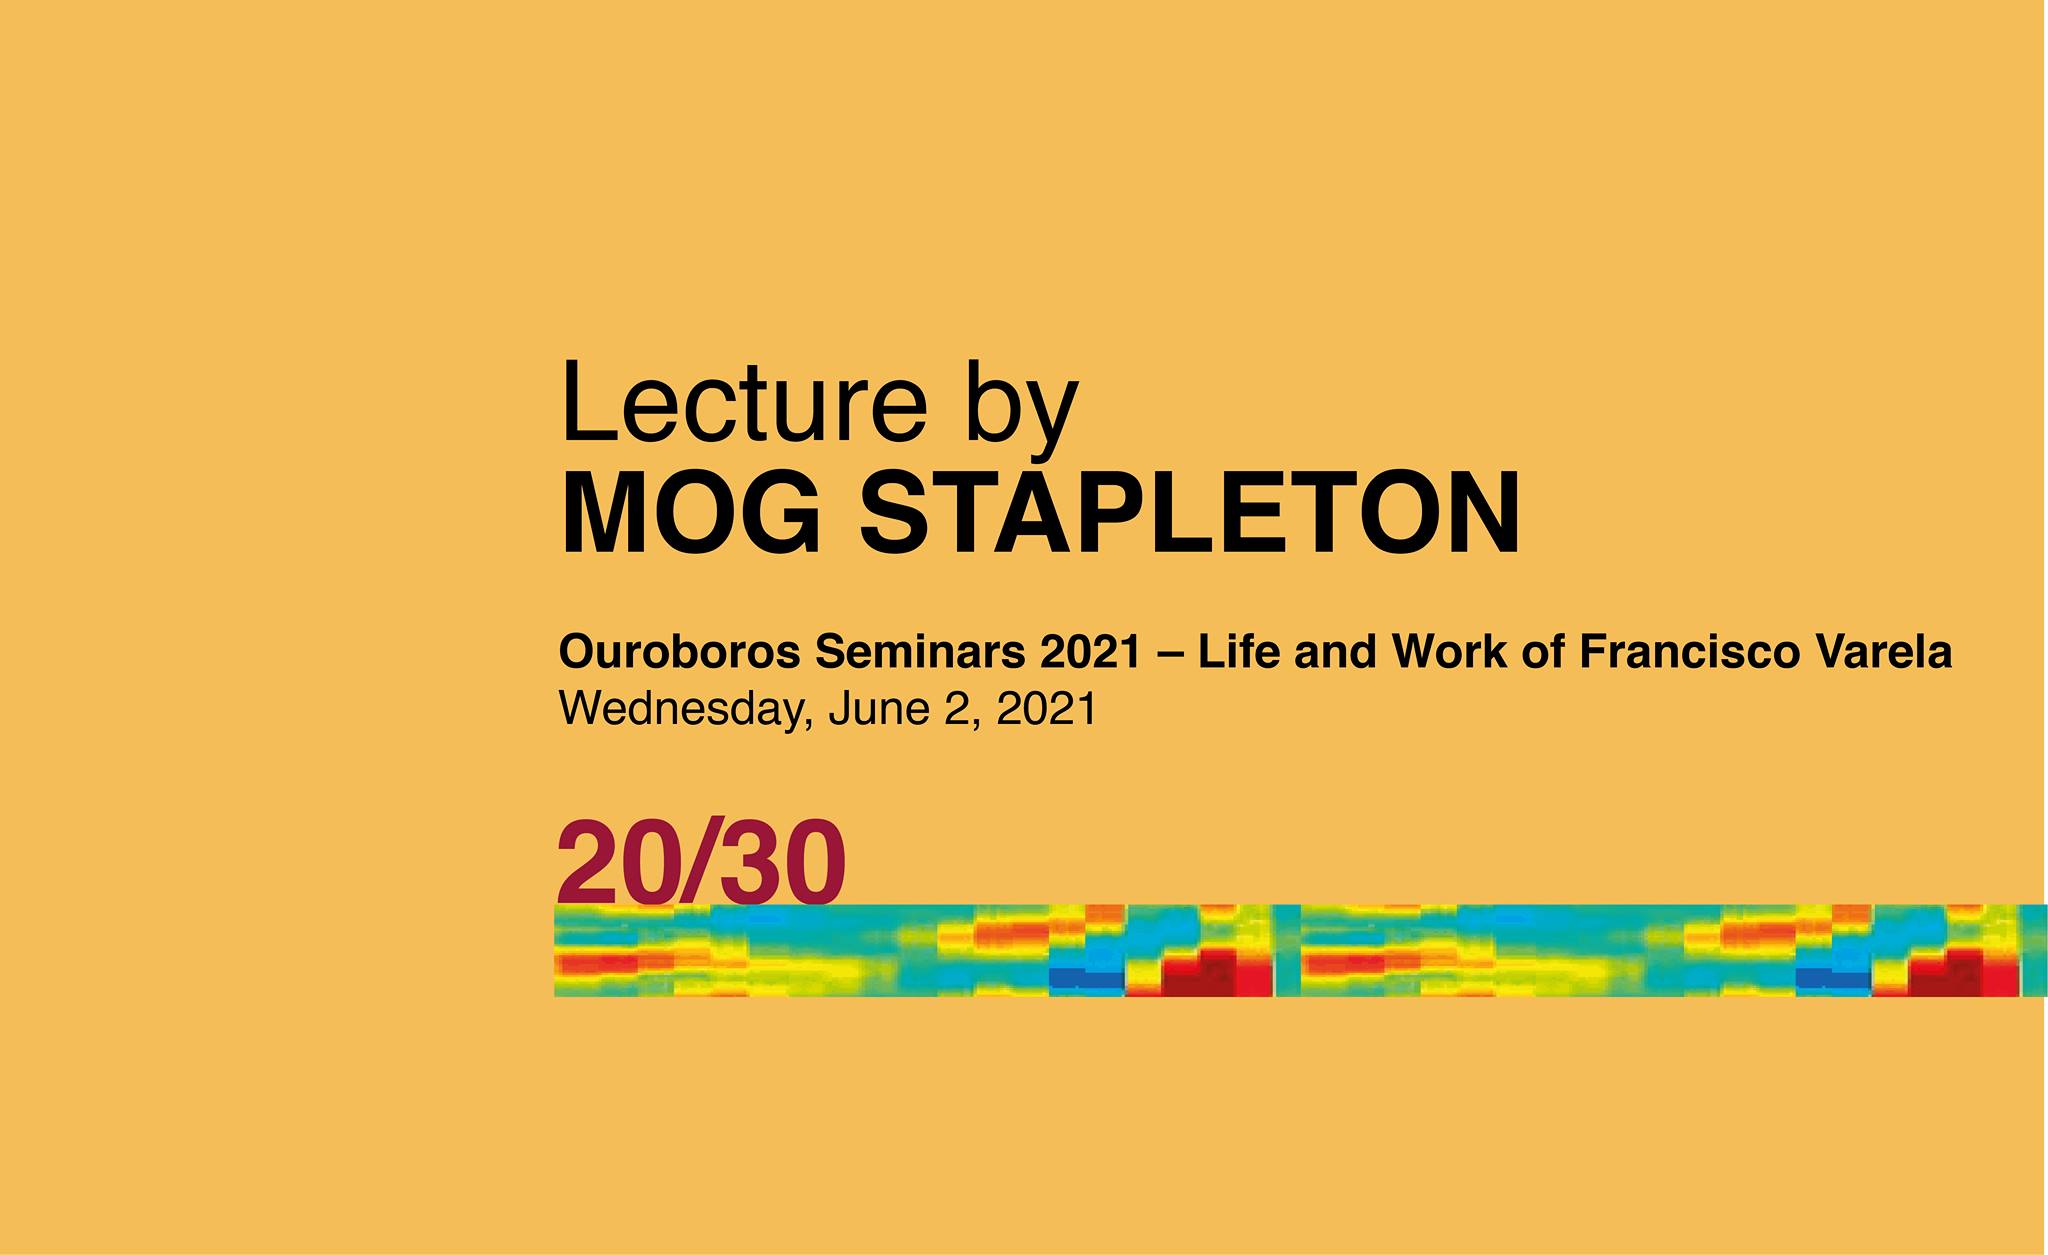 Lecture by Mog Stapleton